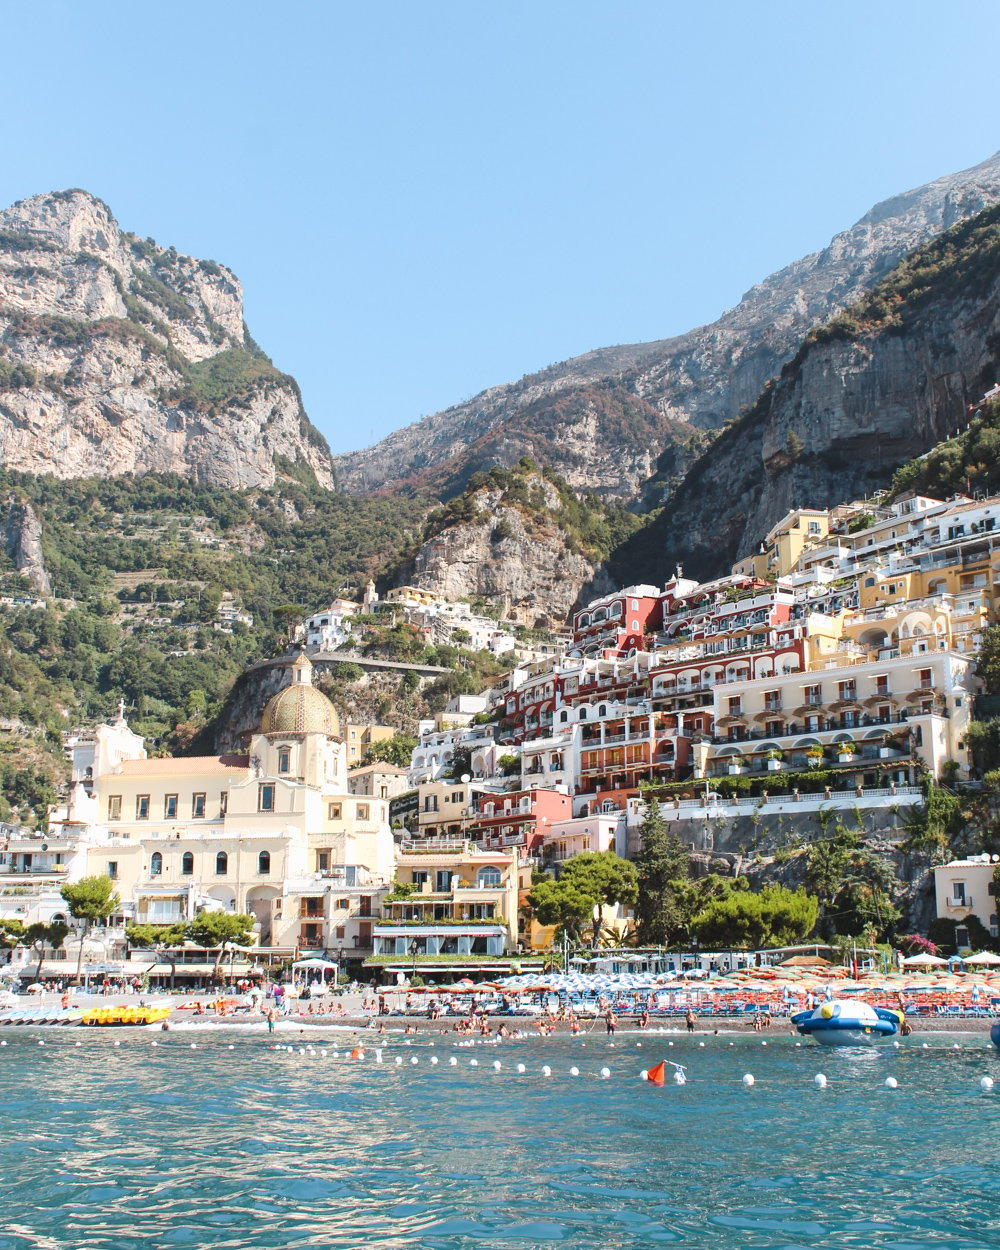 View of Positano from a boat